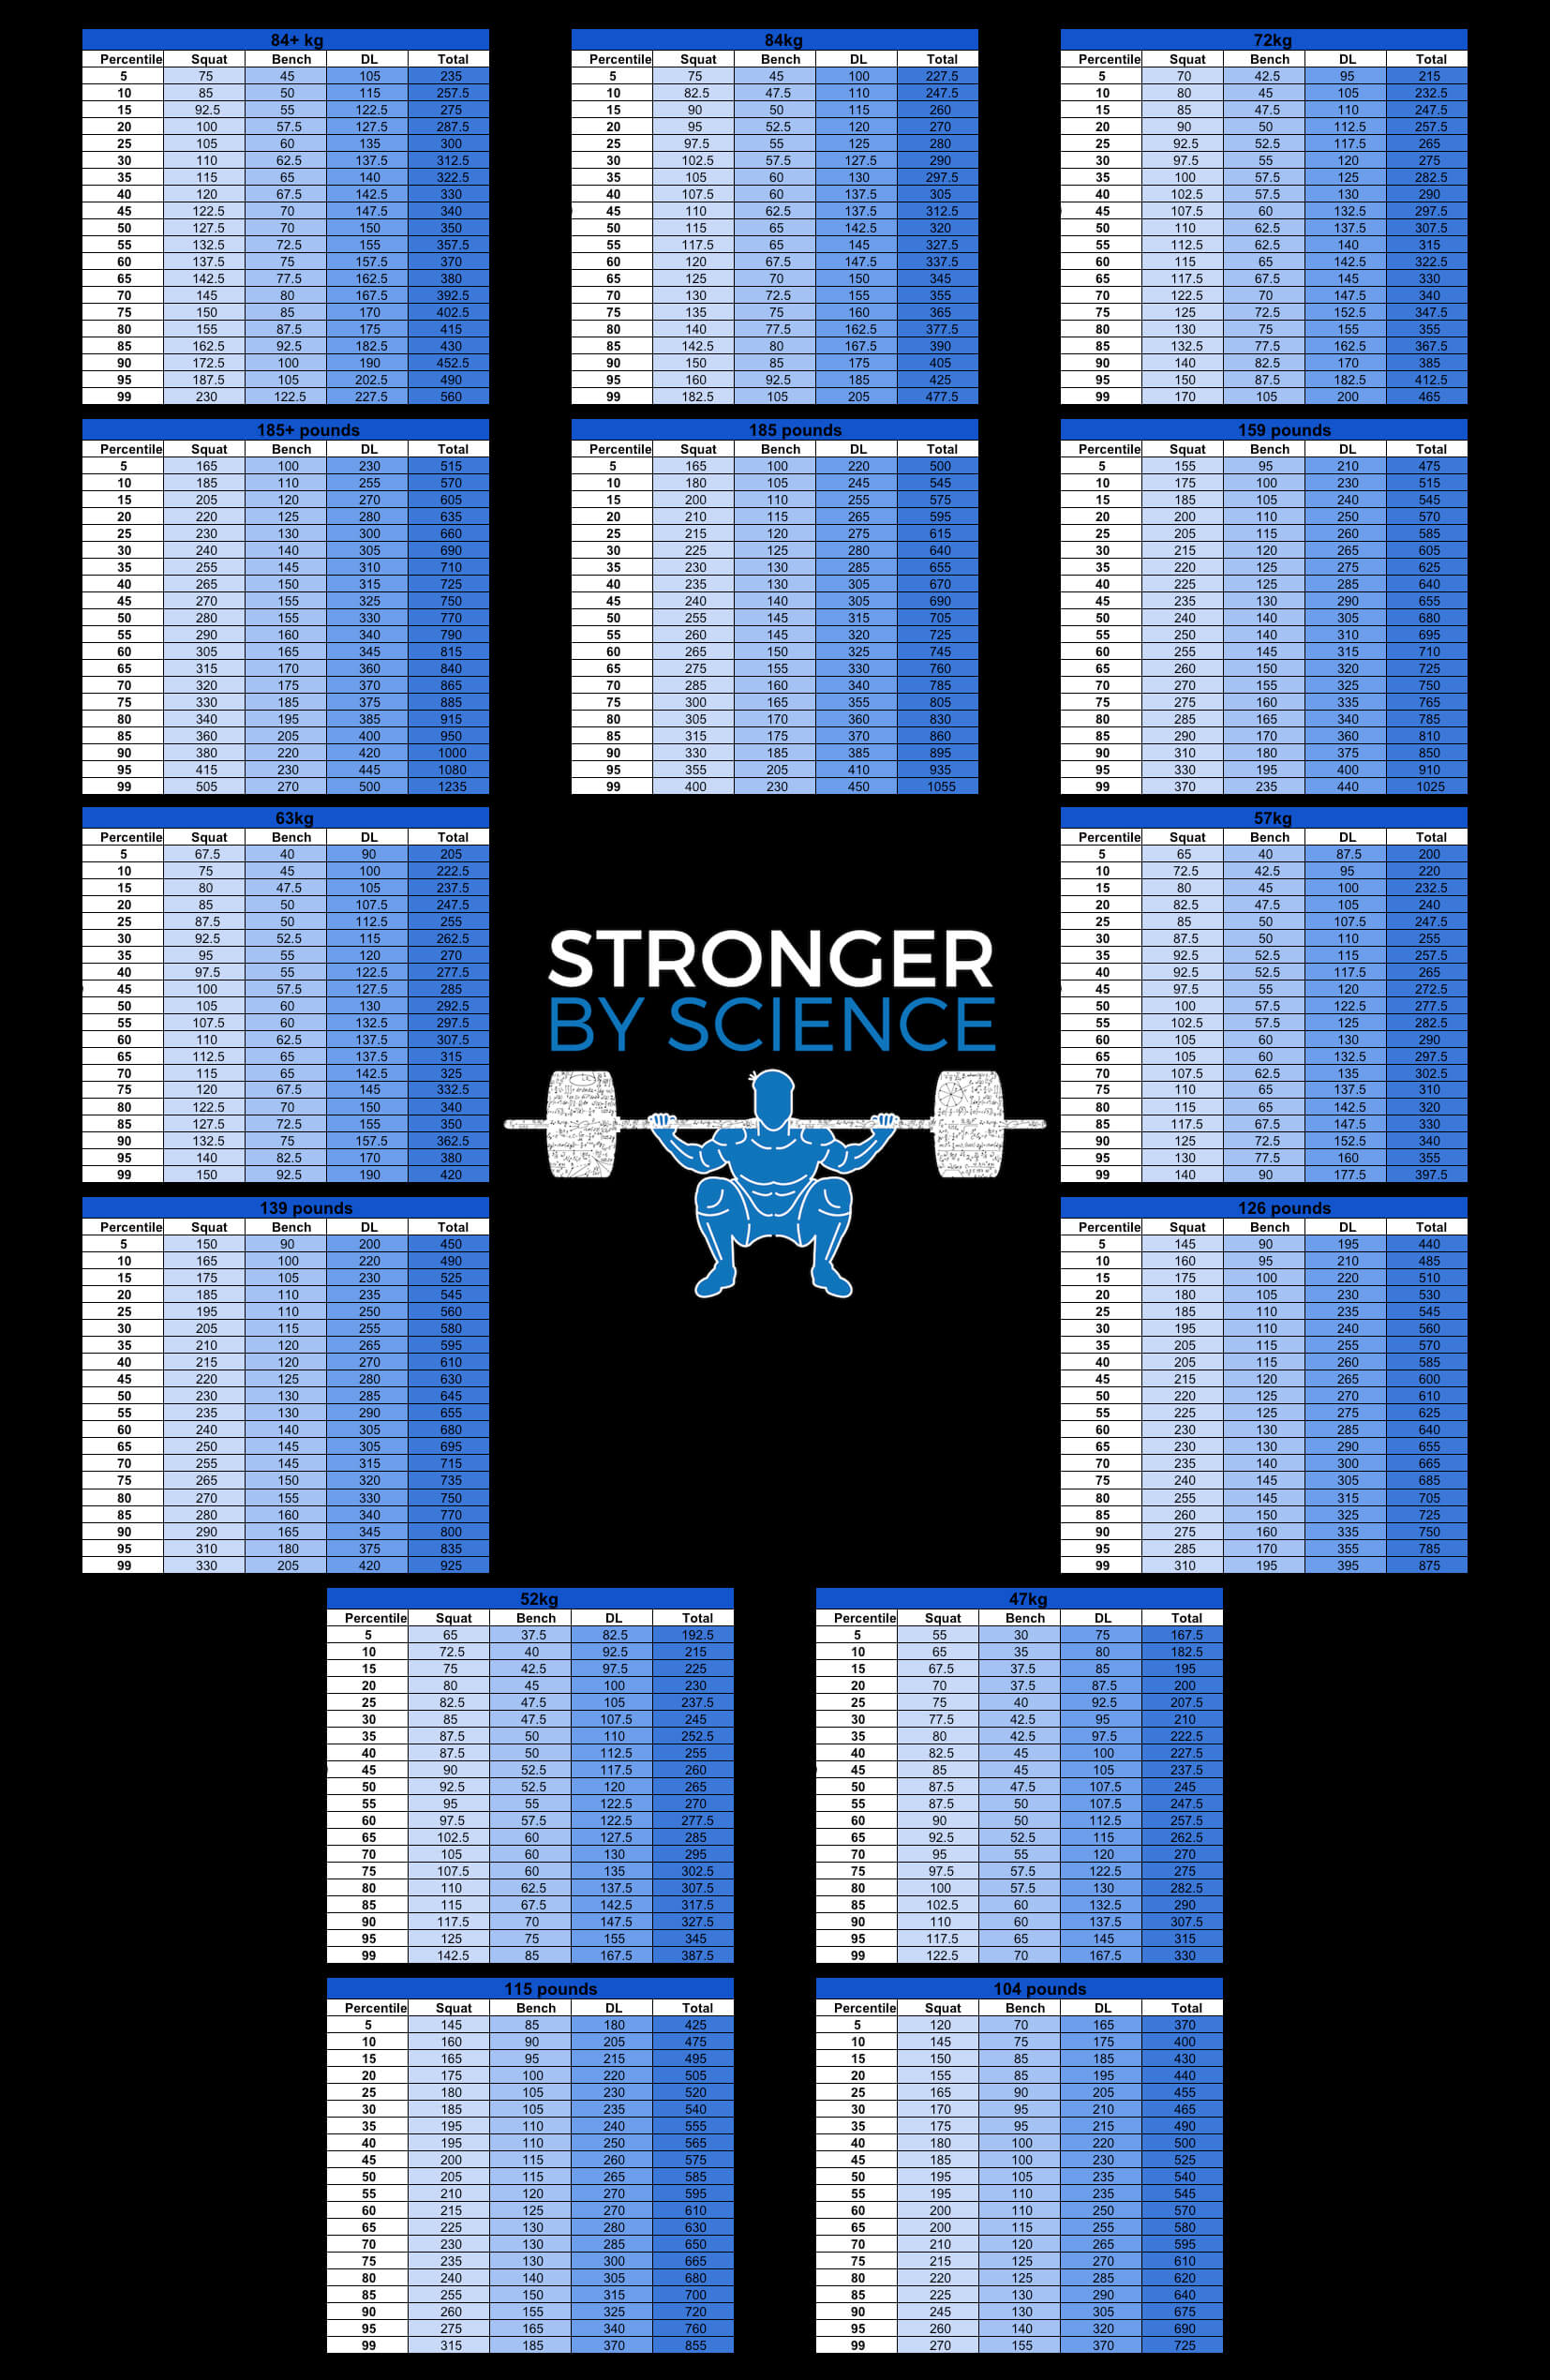 what is strong – women's strength percentiles